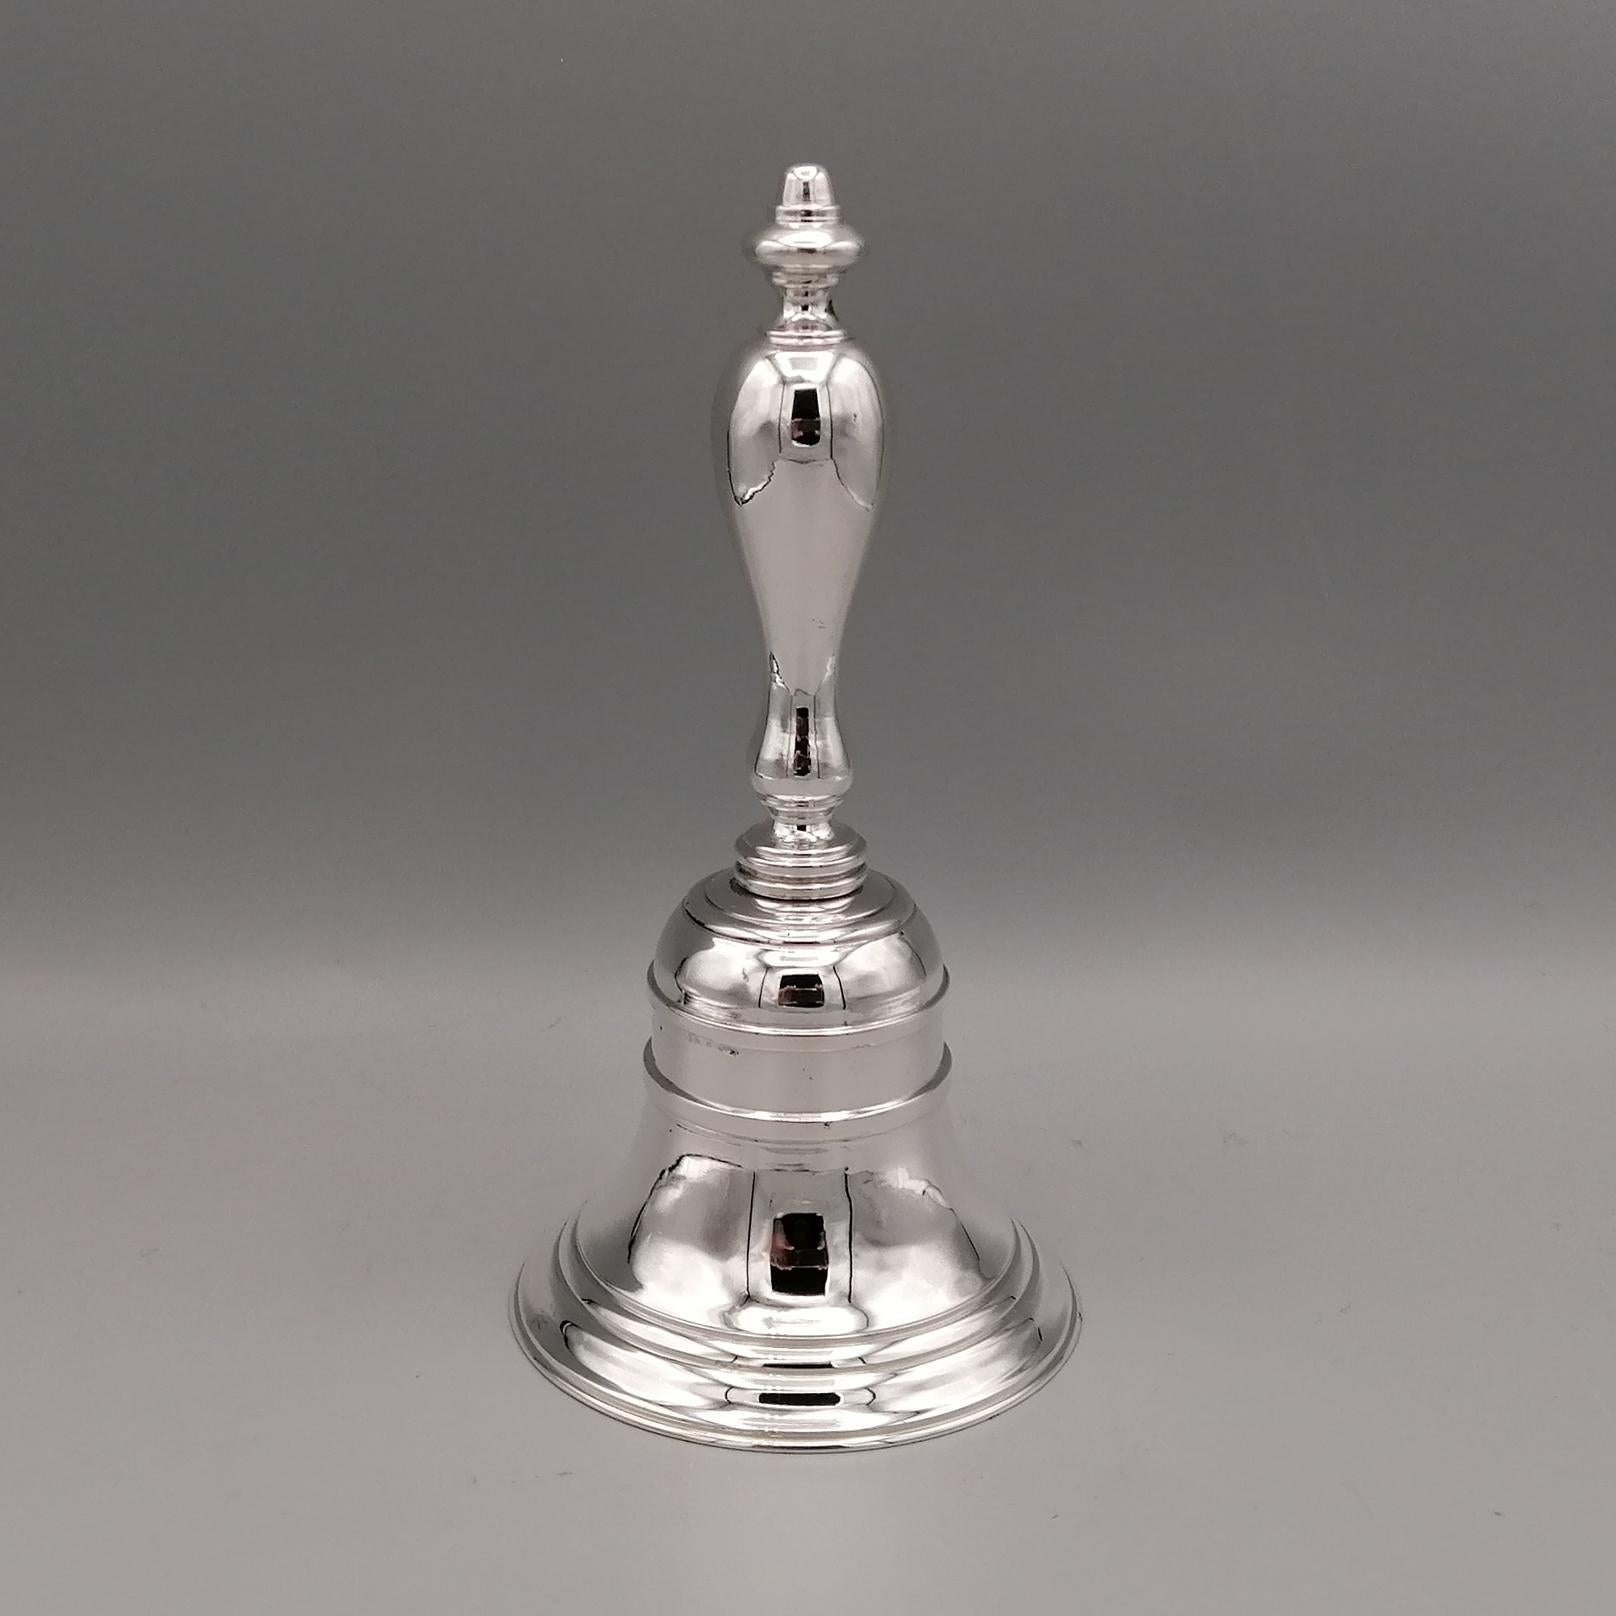 925 Sterling Silver Bell.
The object was made with the technique of casting and turning. The finishing was done with a chisel.
The desk bell is an important example both in size and weight.
Made in Milan - Italy by one of the most famous Italian